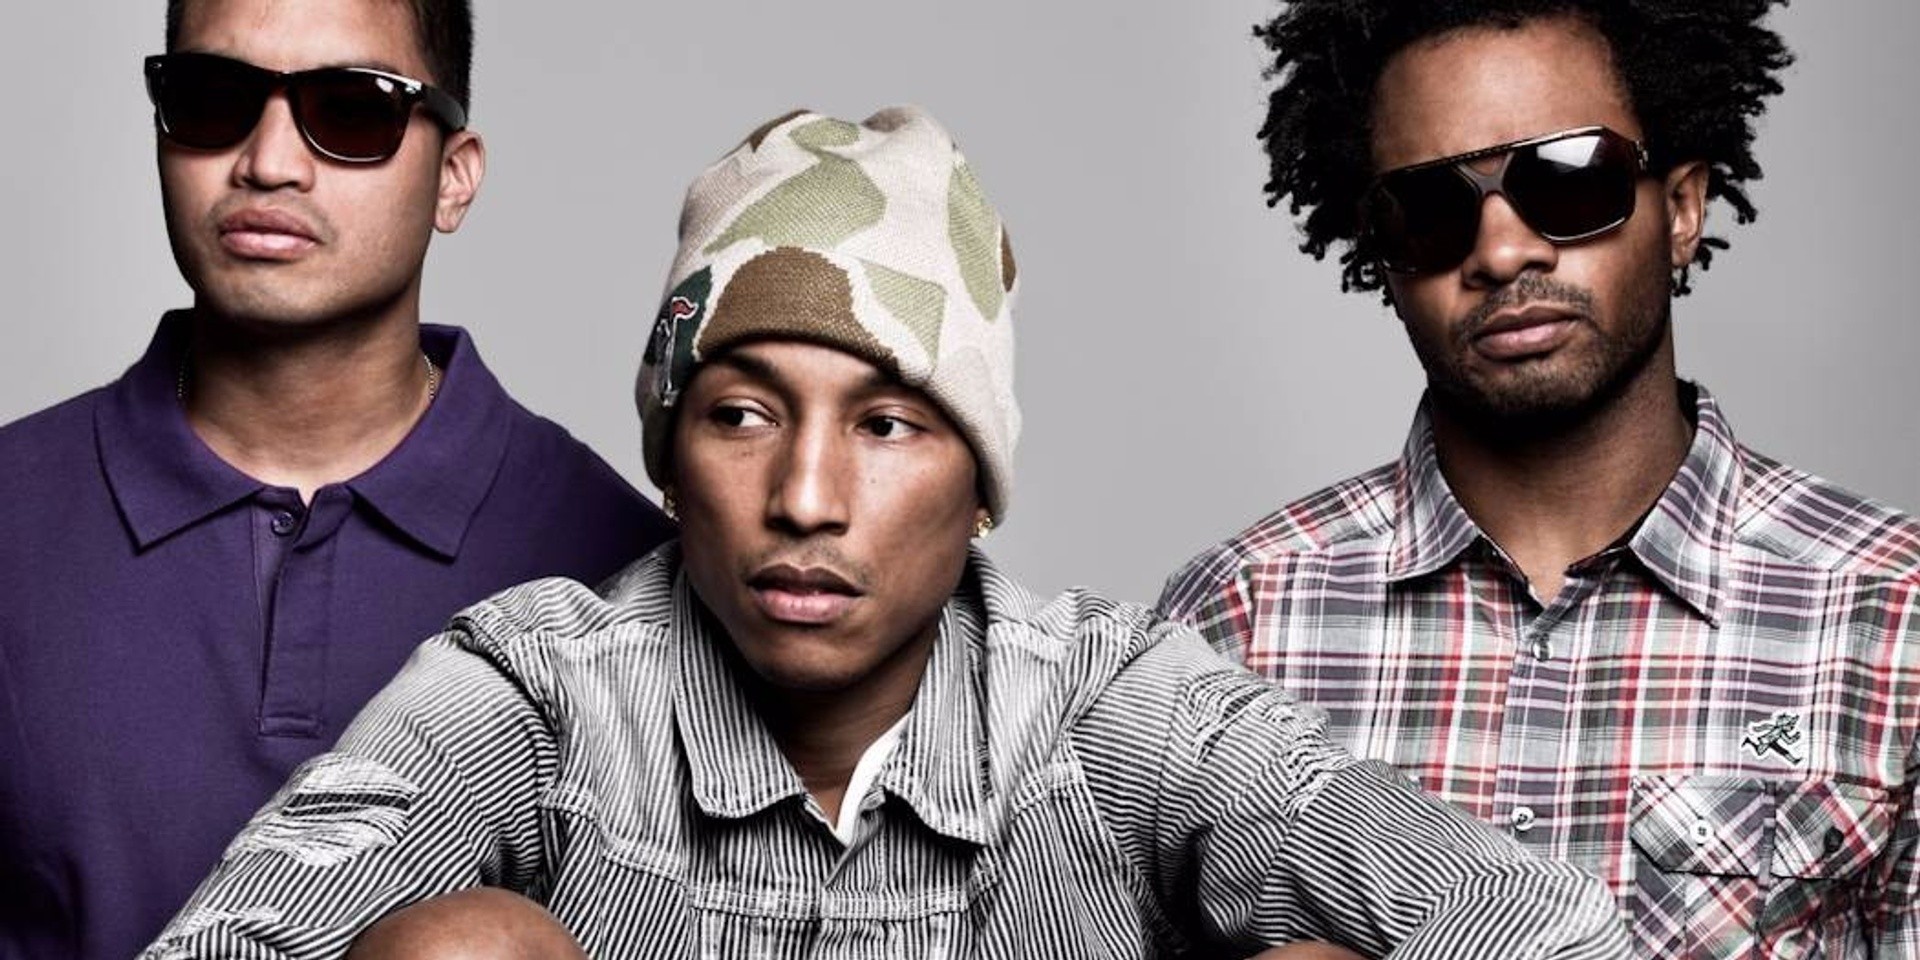 Could N.E.R.D. be releasing new music soon?